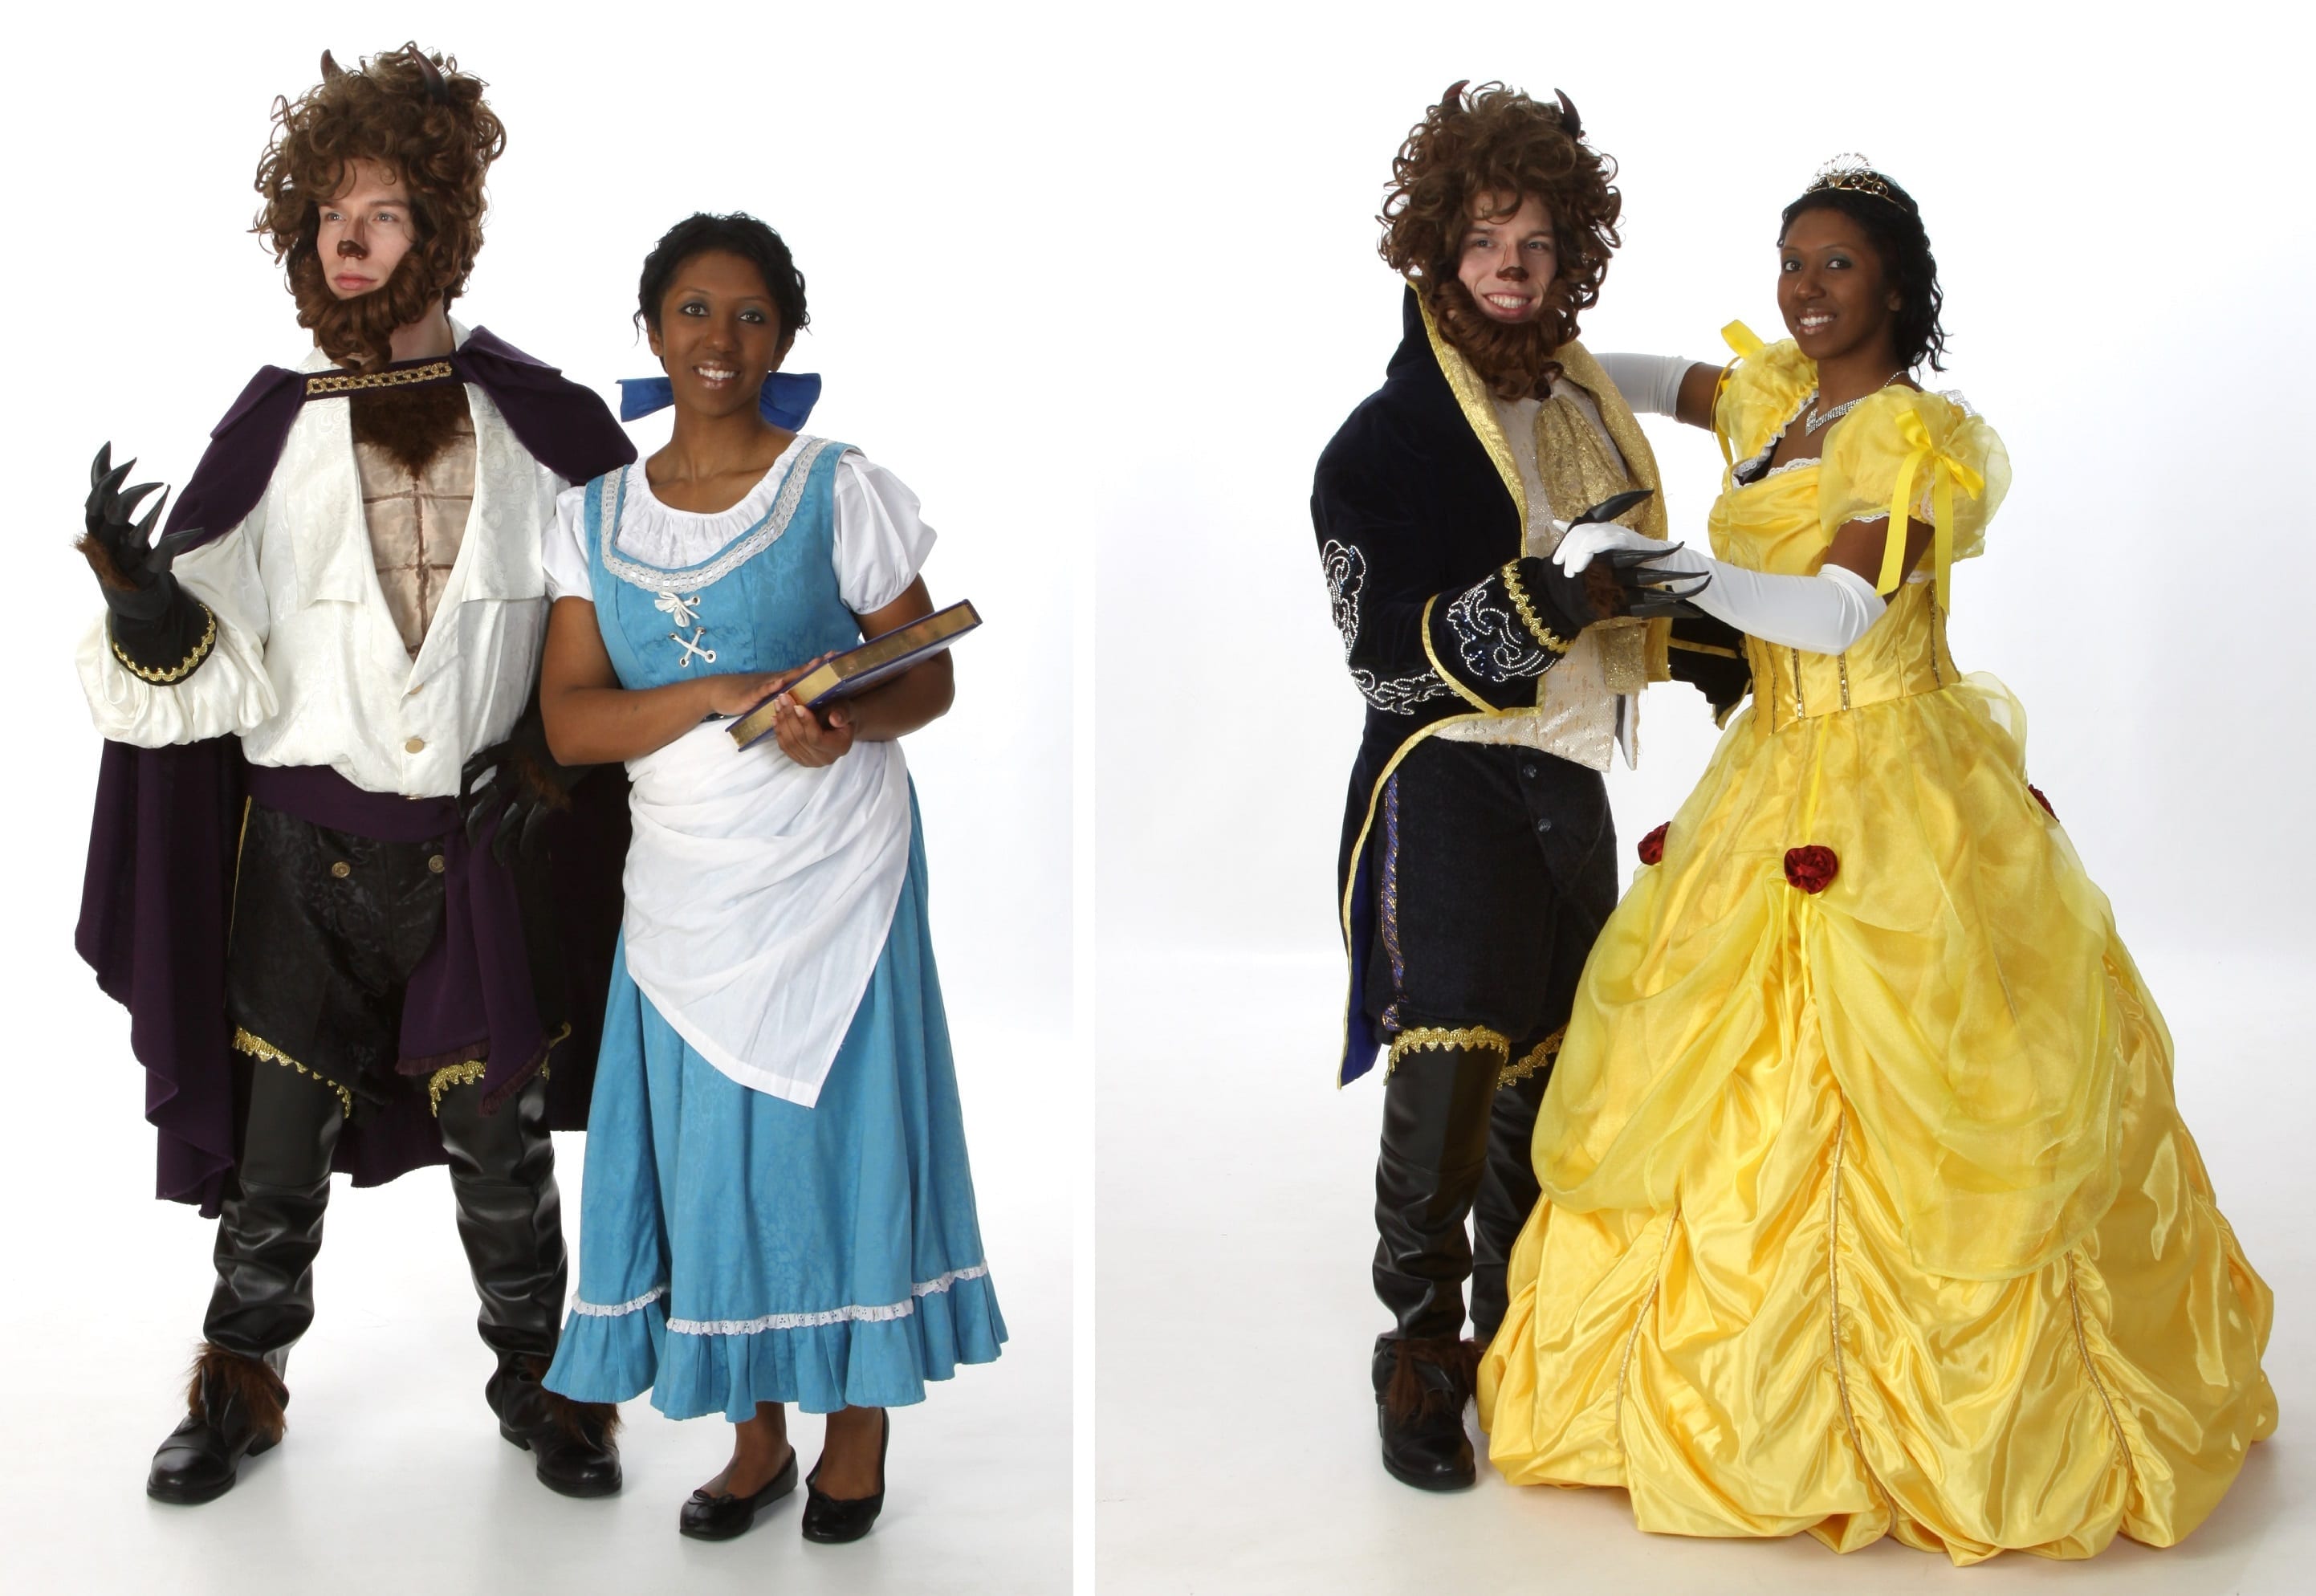 Theatrical Costume Rentals: Beauty and the Beast - Costume Holiday House